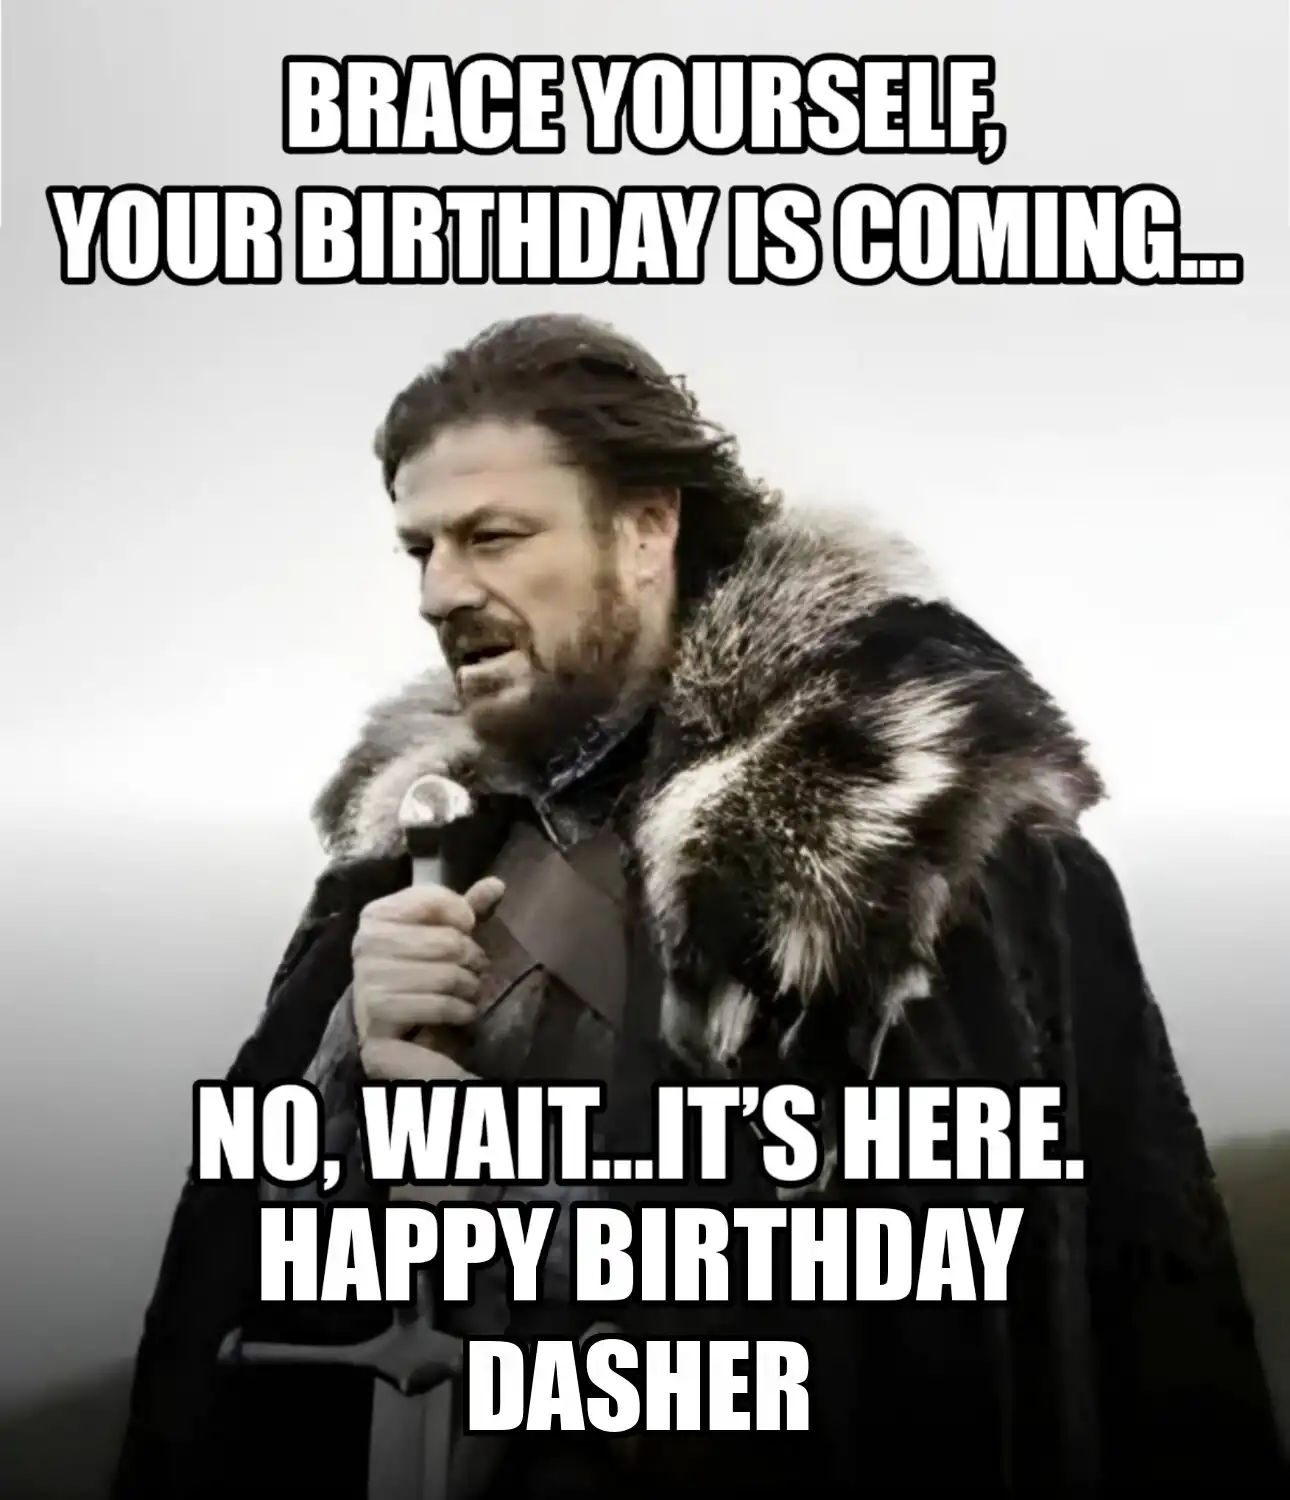 Happy Birthday Dasher Brace Yourself Your Birthday Is Coming Meme